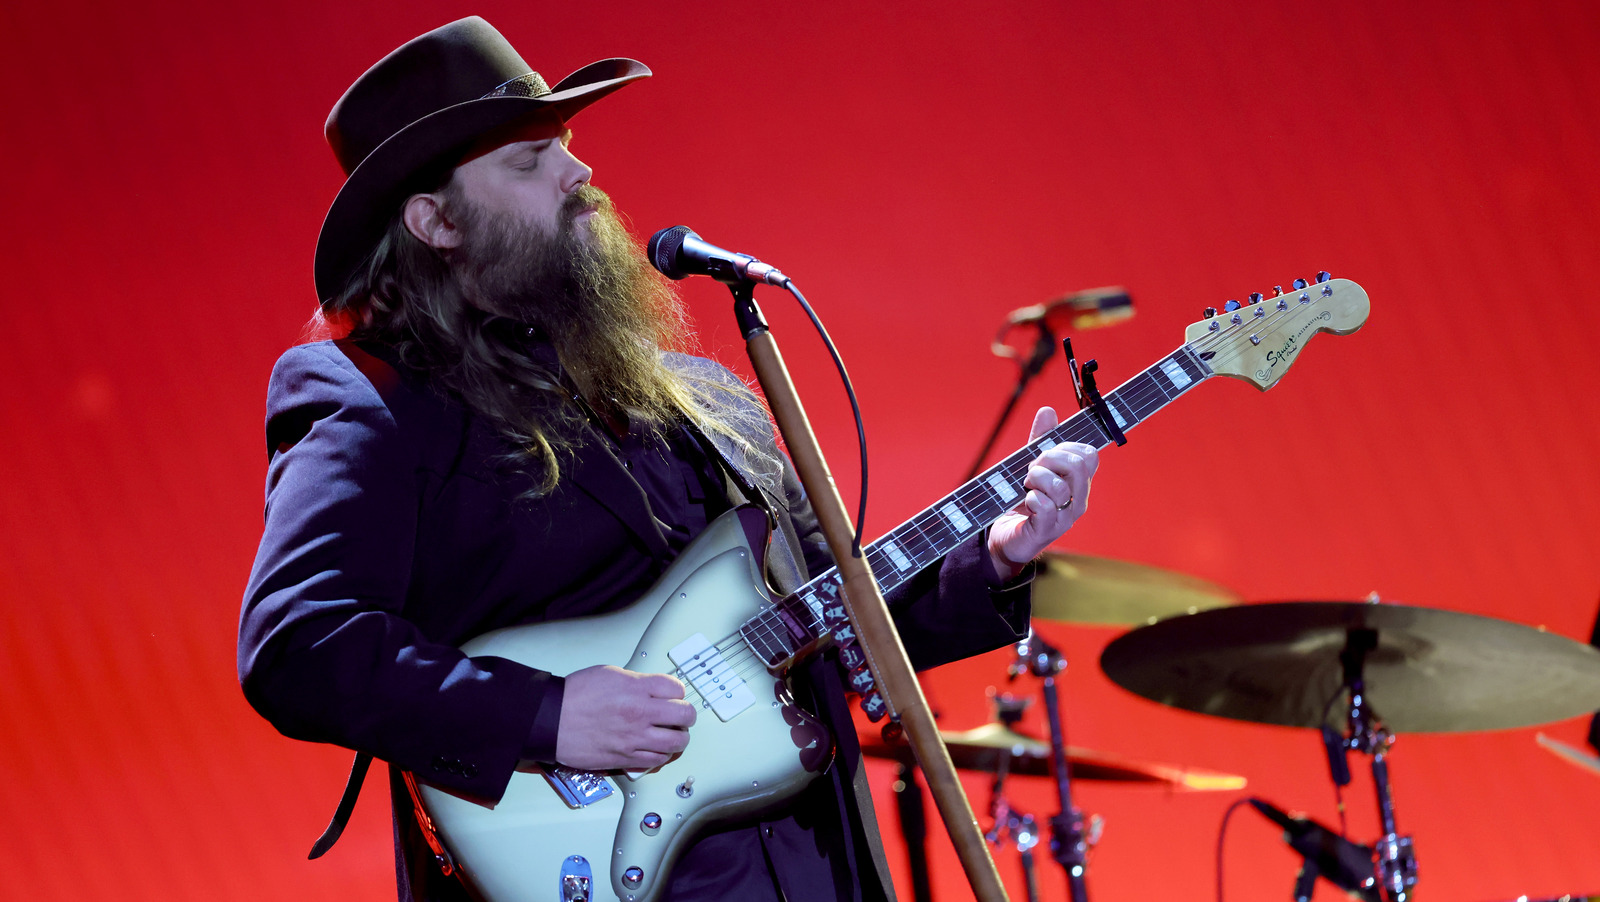 The Heartbreaking Meaning Behind Chris Stapleton's ACM Performance